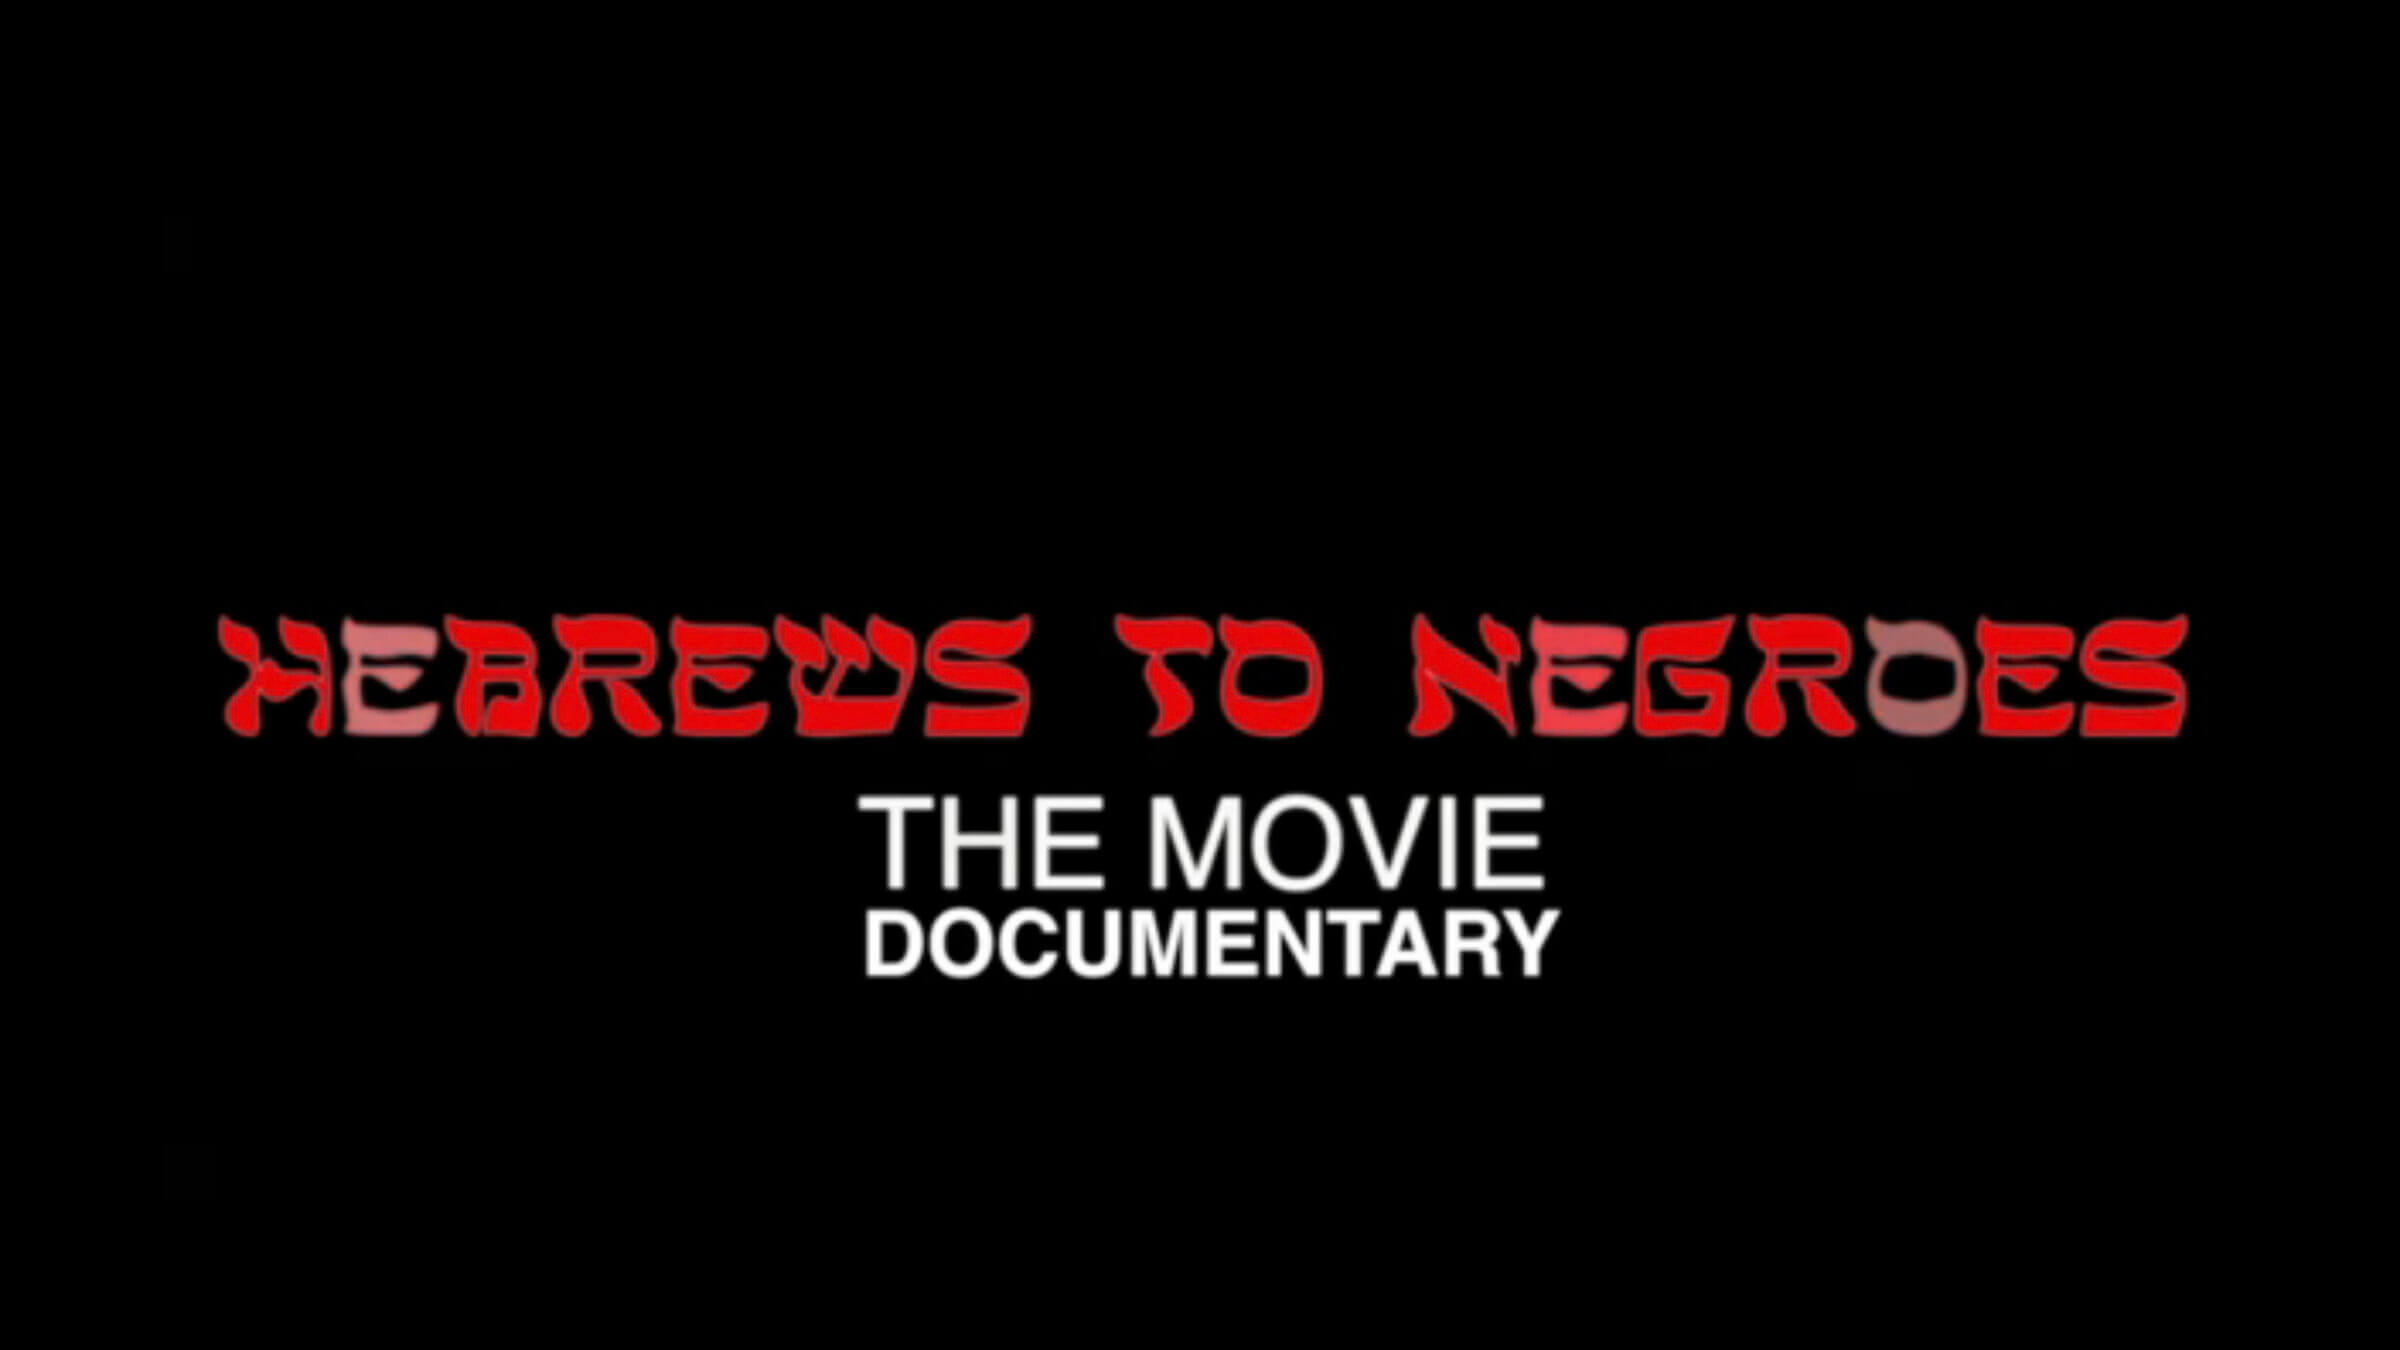 "Hebrews to Negroes: Wake Up Black America" is based on a book of the same title by the film's director.